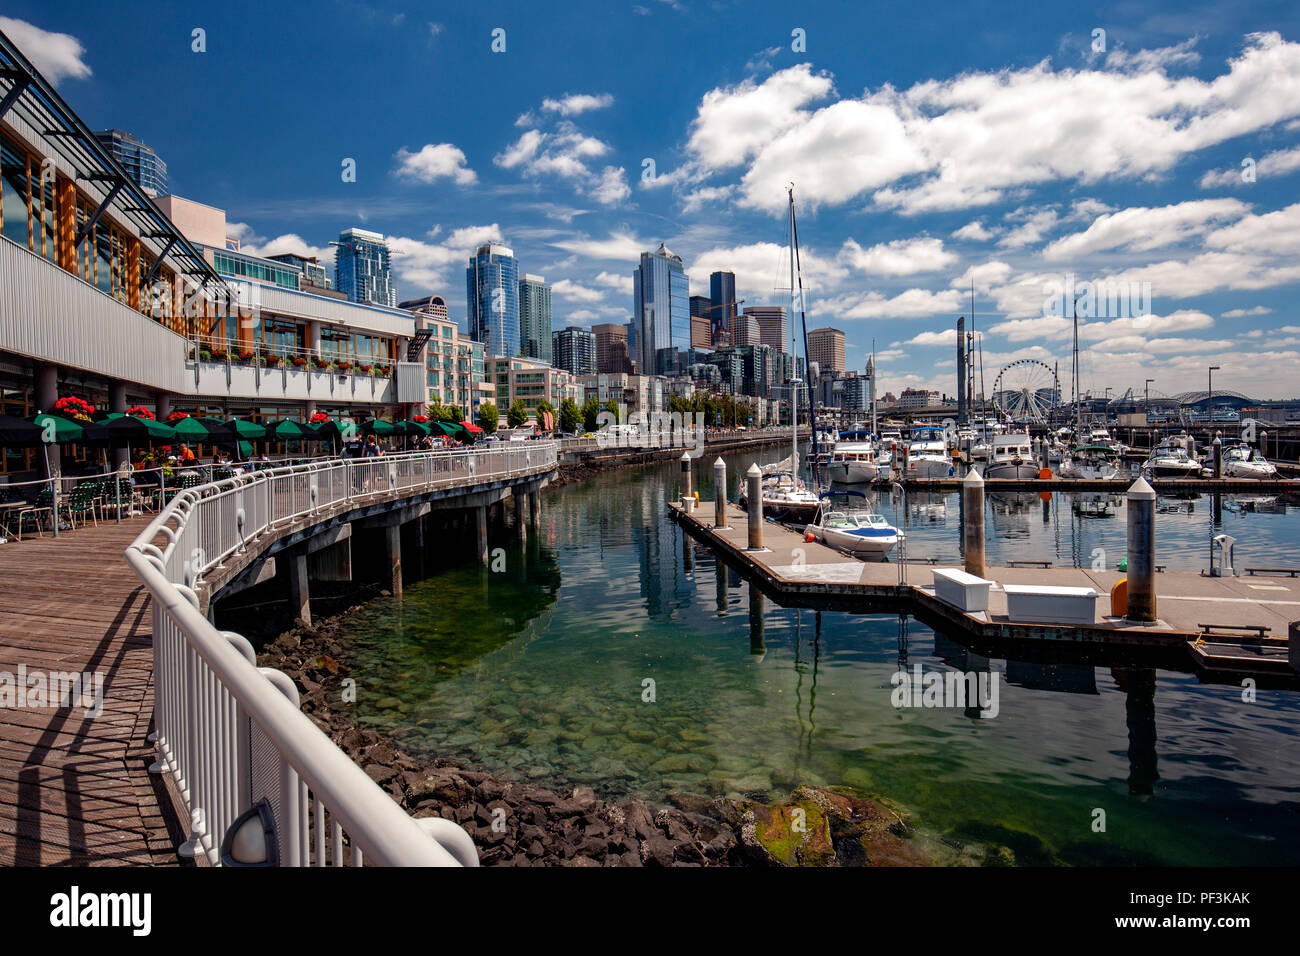 View of Seattle's Waterfront from Bell Street Pier and Conference Center at Pier 66 - Seattle, Washington, USA Stock Photo